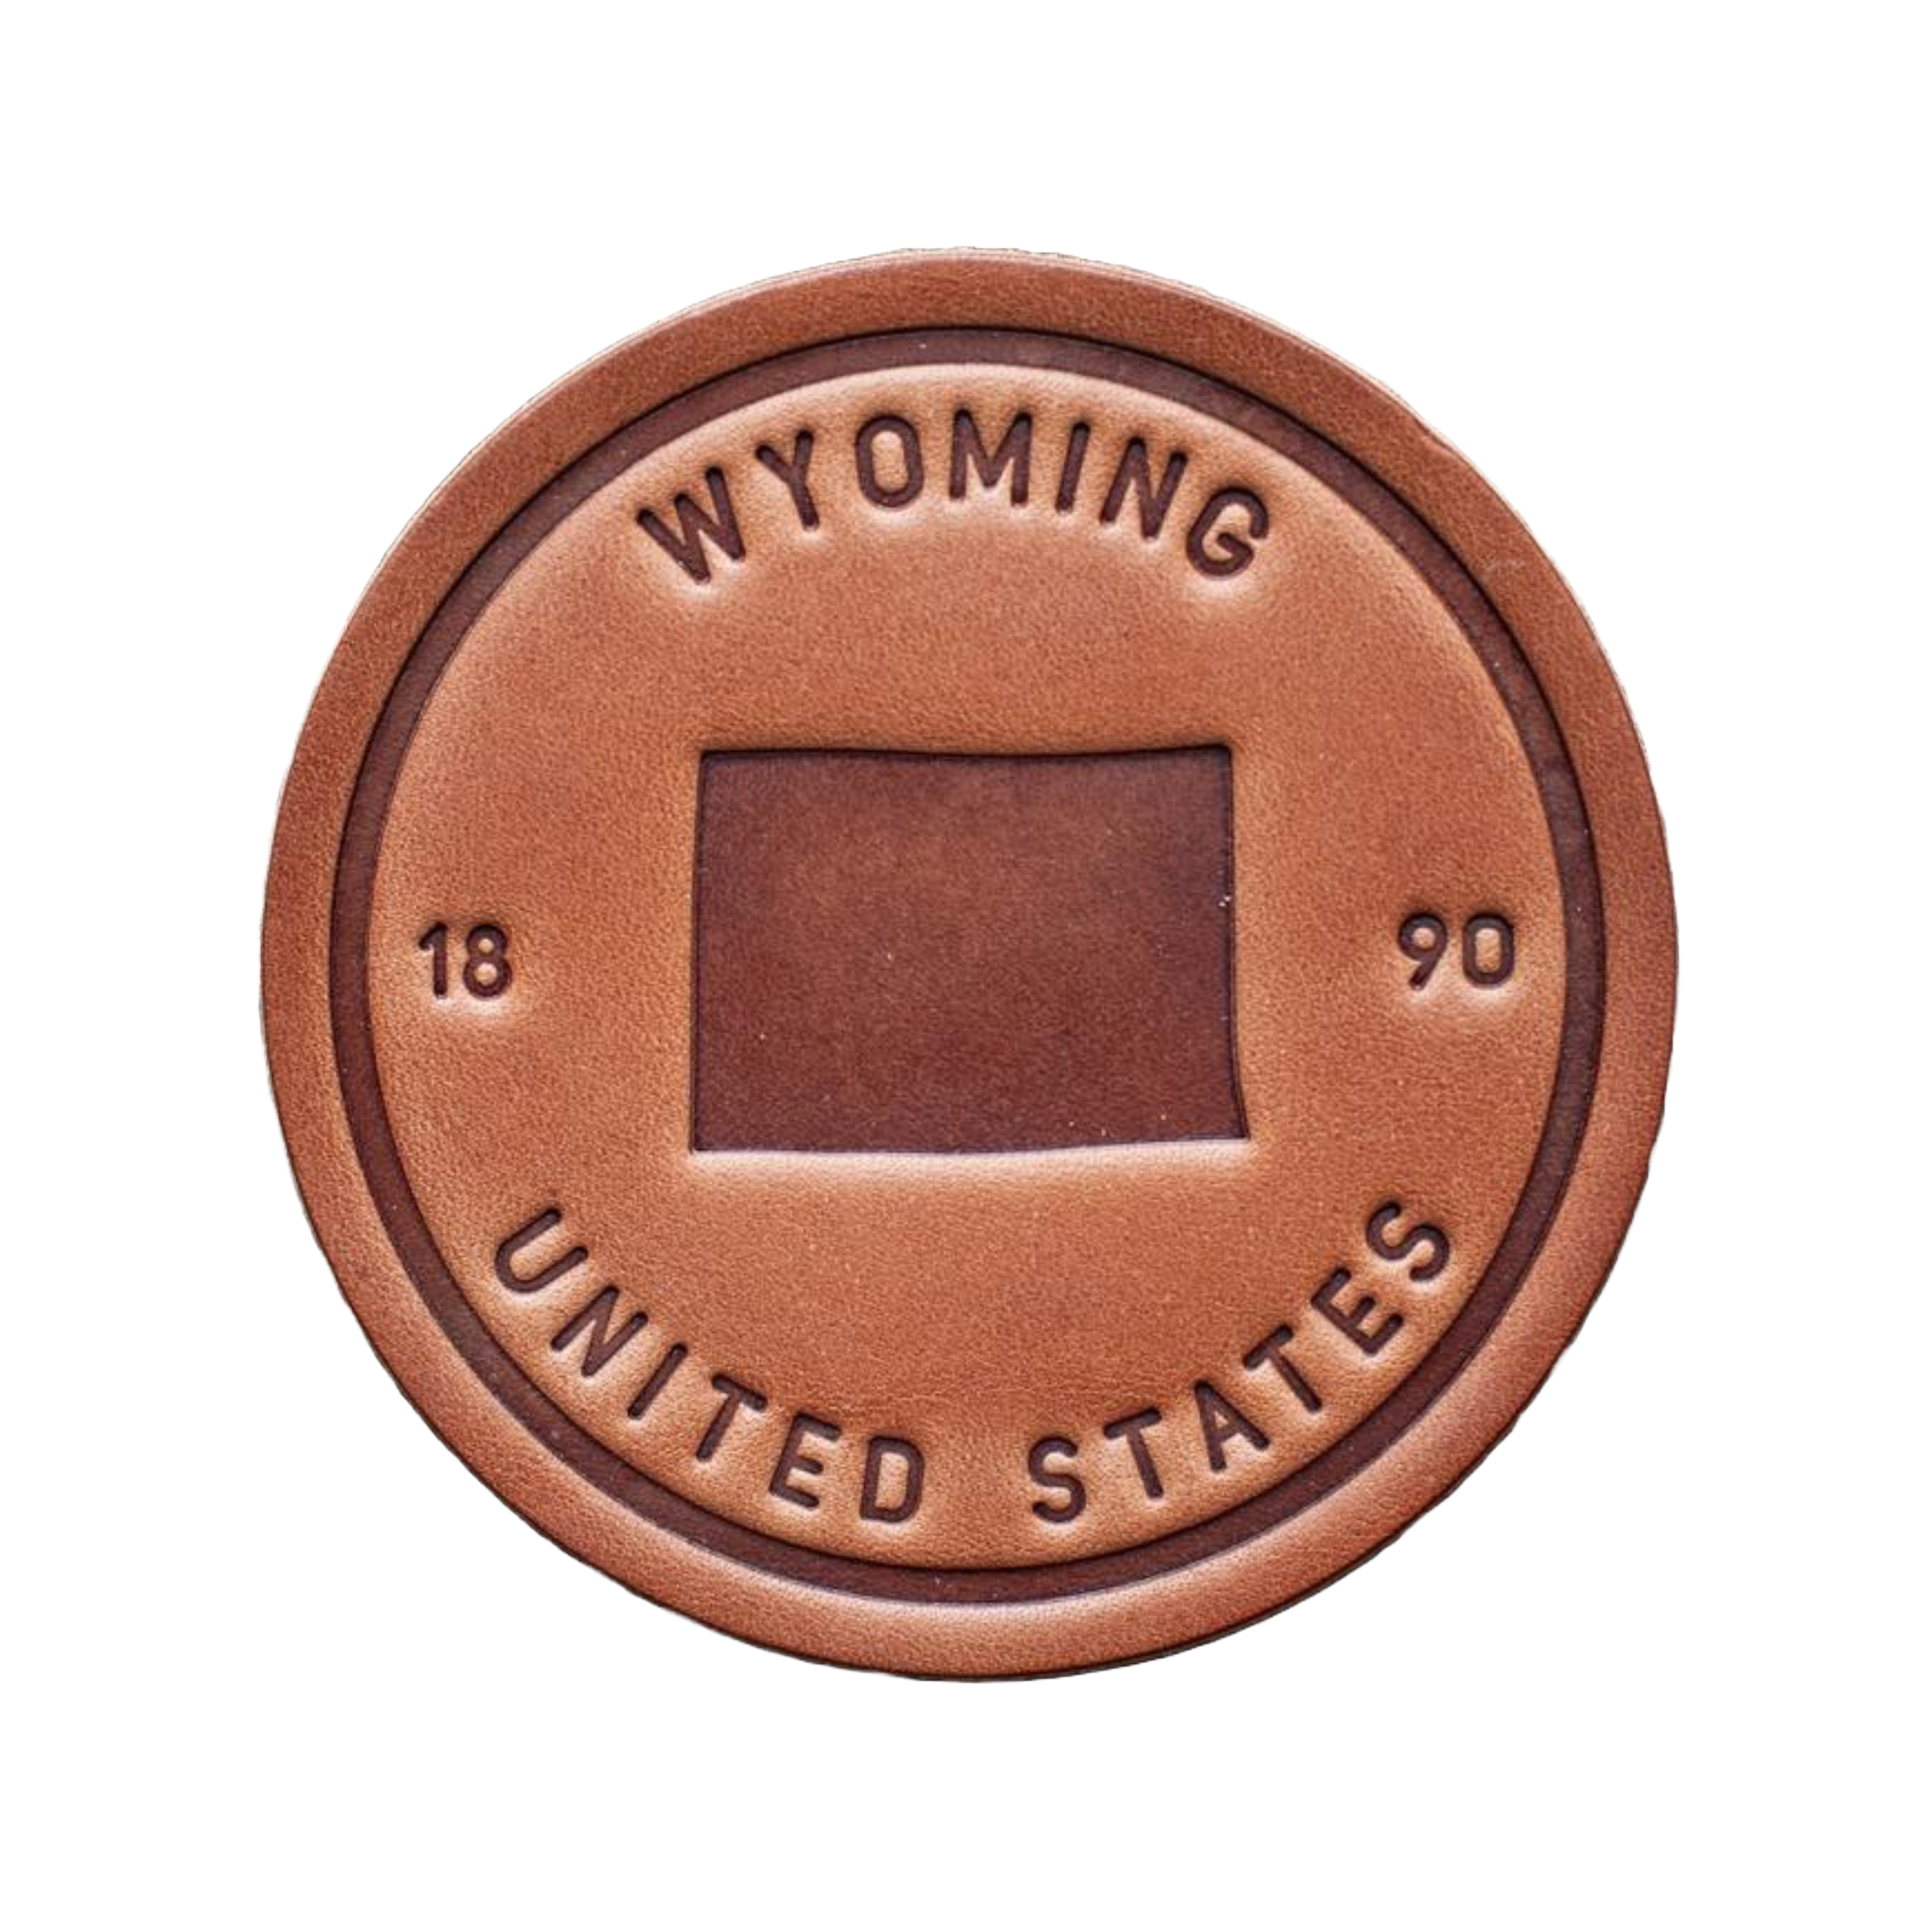 Wyoming State Silhouette Leather Coaster